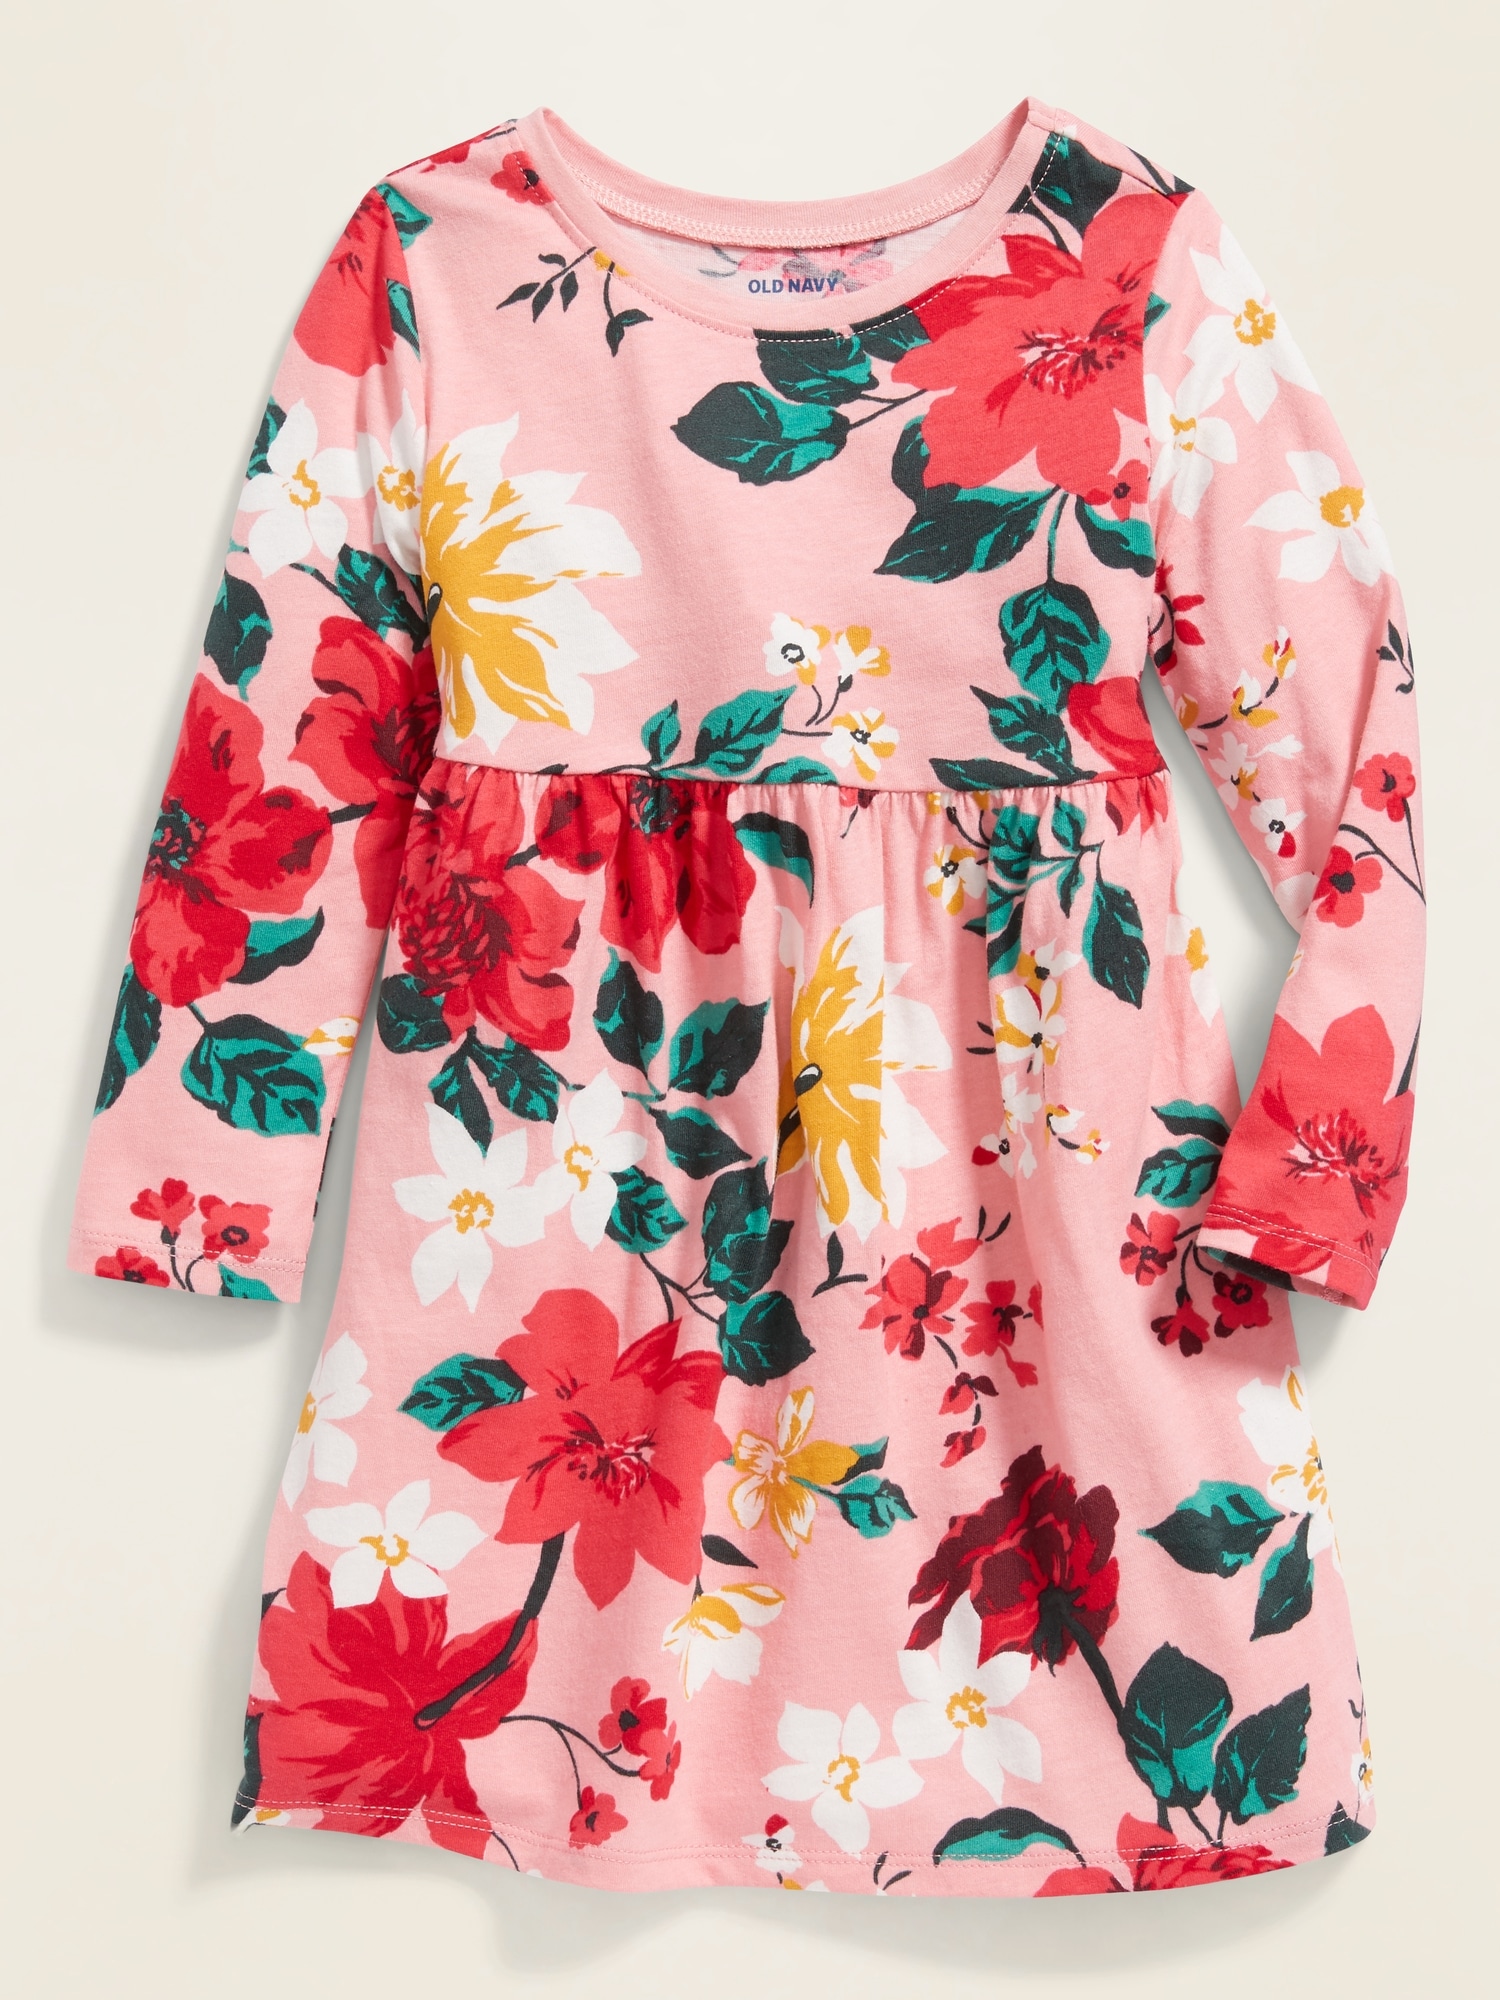 Spring Clearance Sale Jersey Fit /& Flare Dress for Toddler Girls By Old Navy!